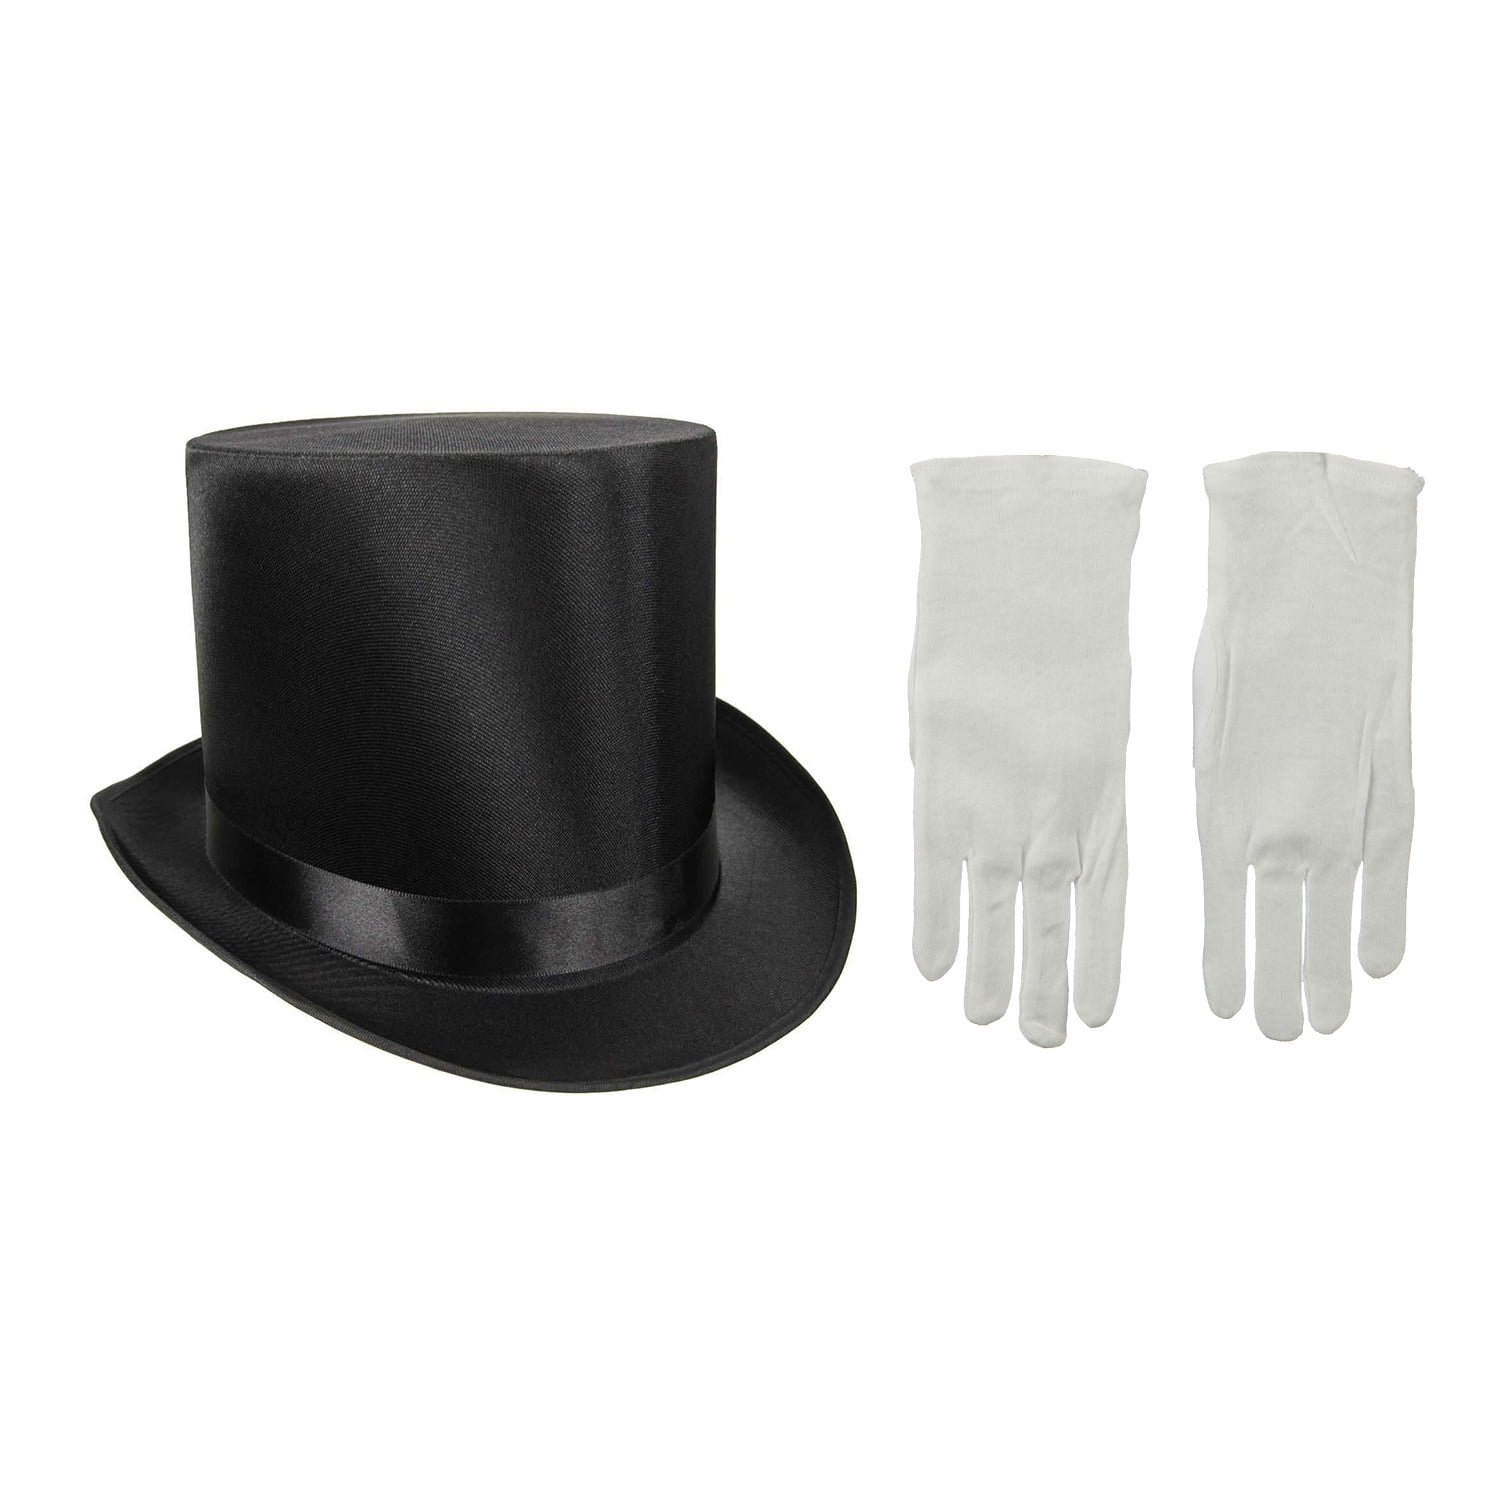 Forum Novelties Mens Deluxe Adult Satin Top Hat Costume Accessory One Size Black 